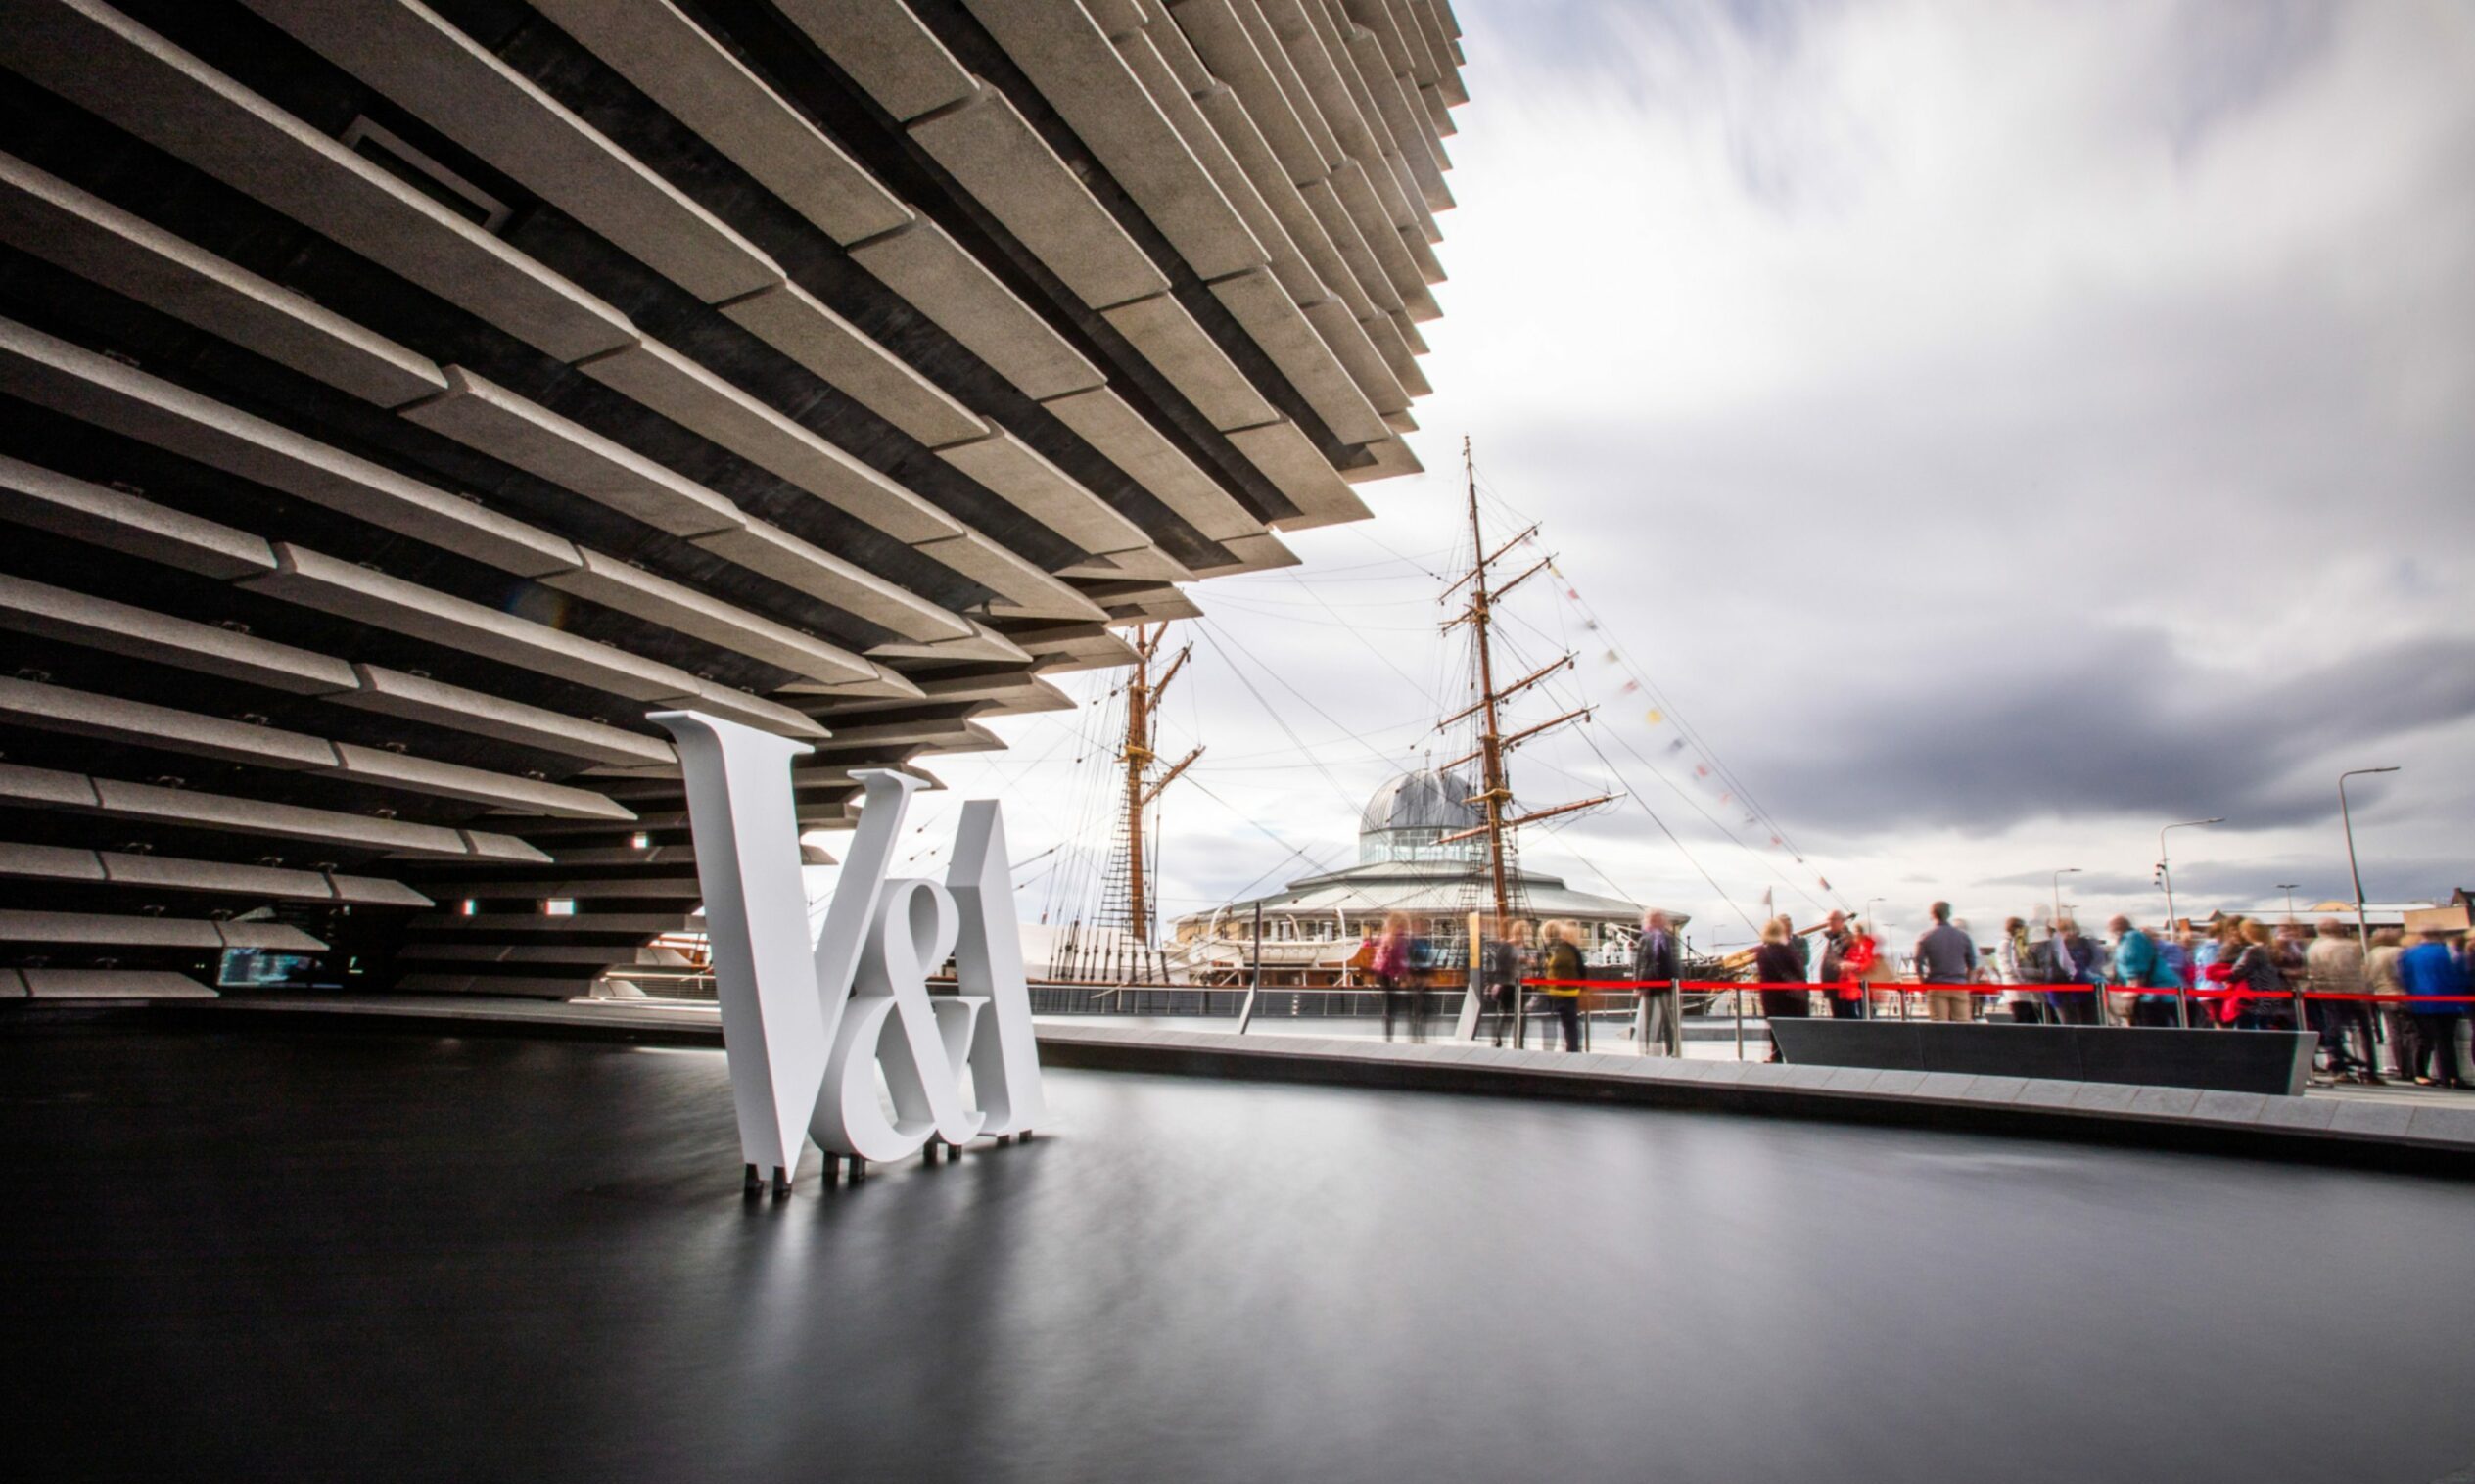 V&A Dundee opening in 2018. Image: Steve MacDougall/DC Thomson.